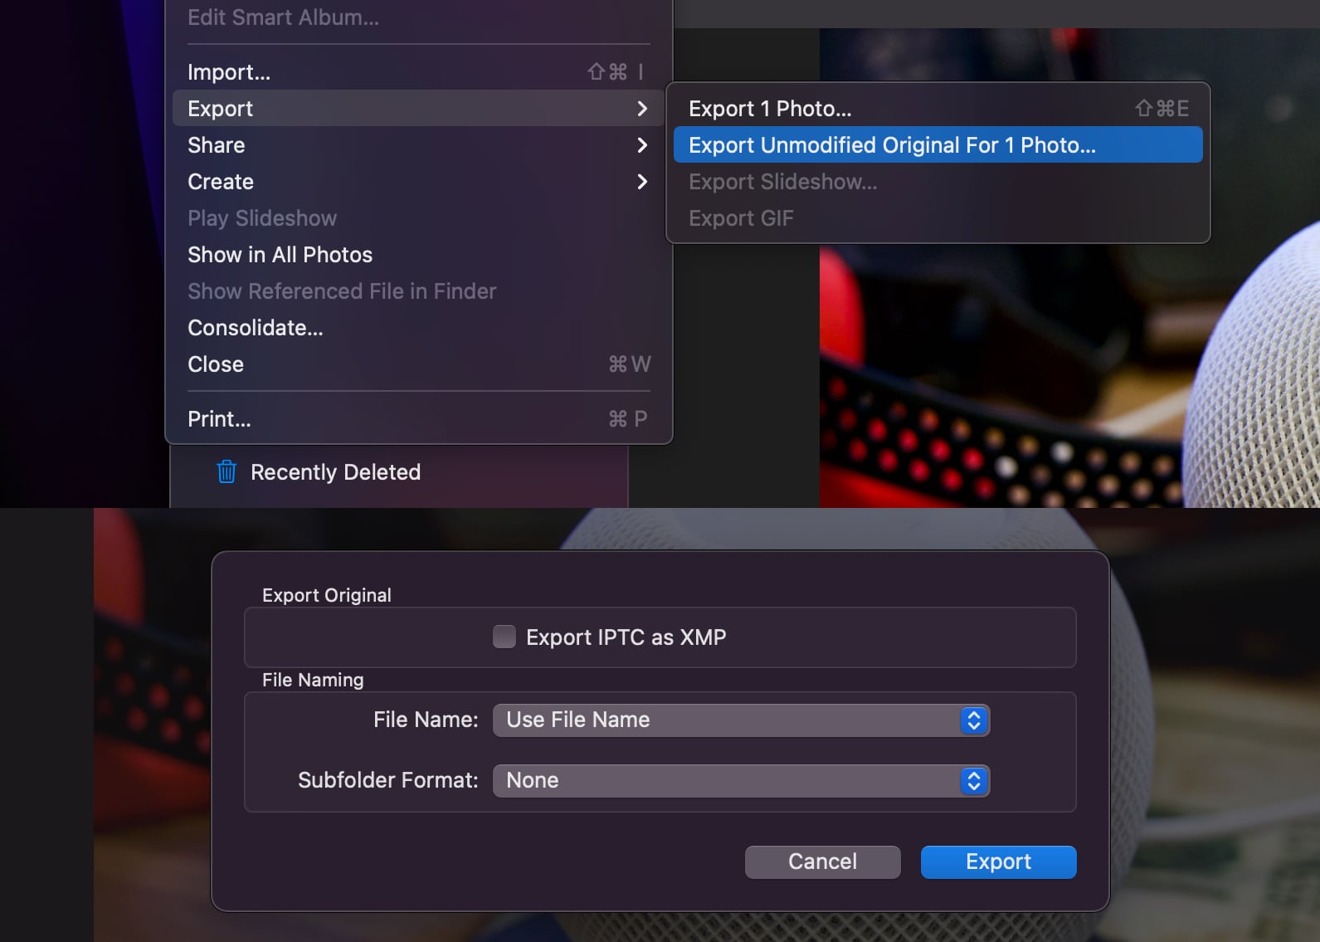 Make sure you use the correct option to export the RAW image from Photos